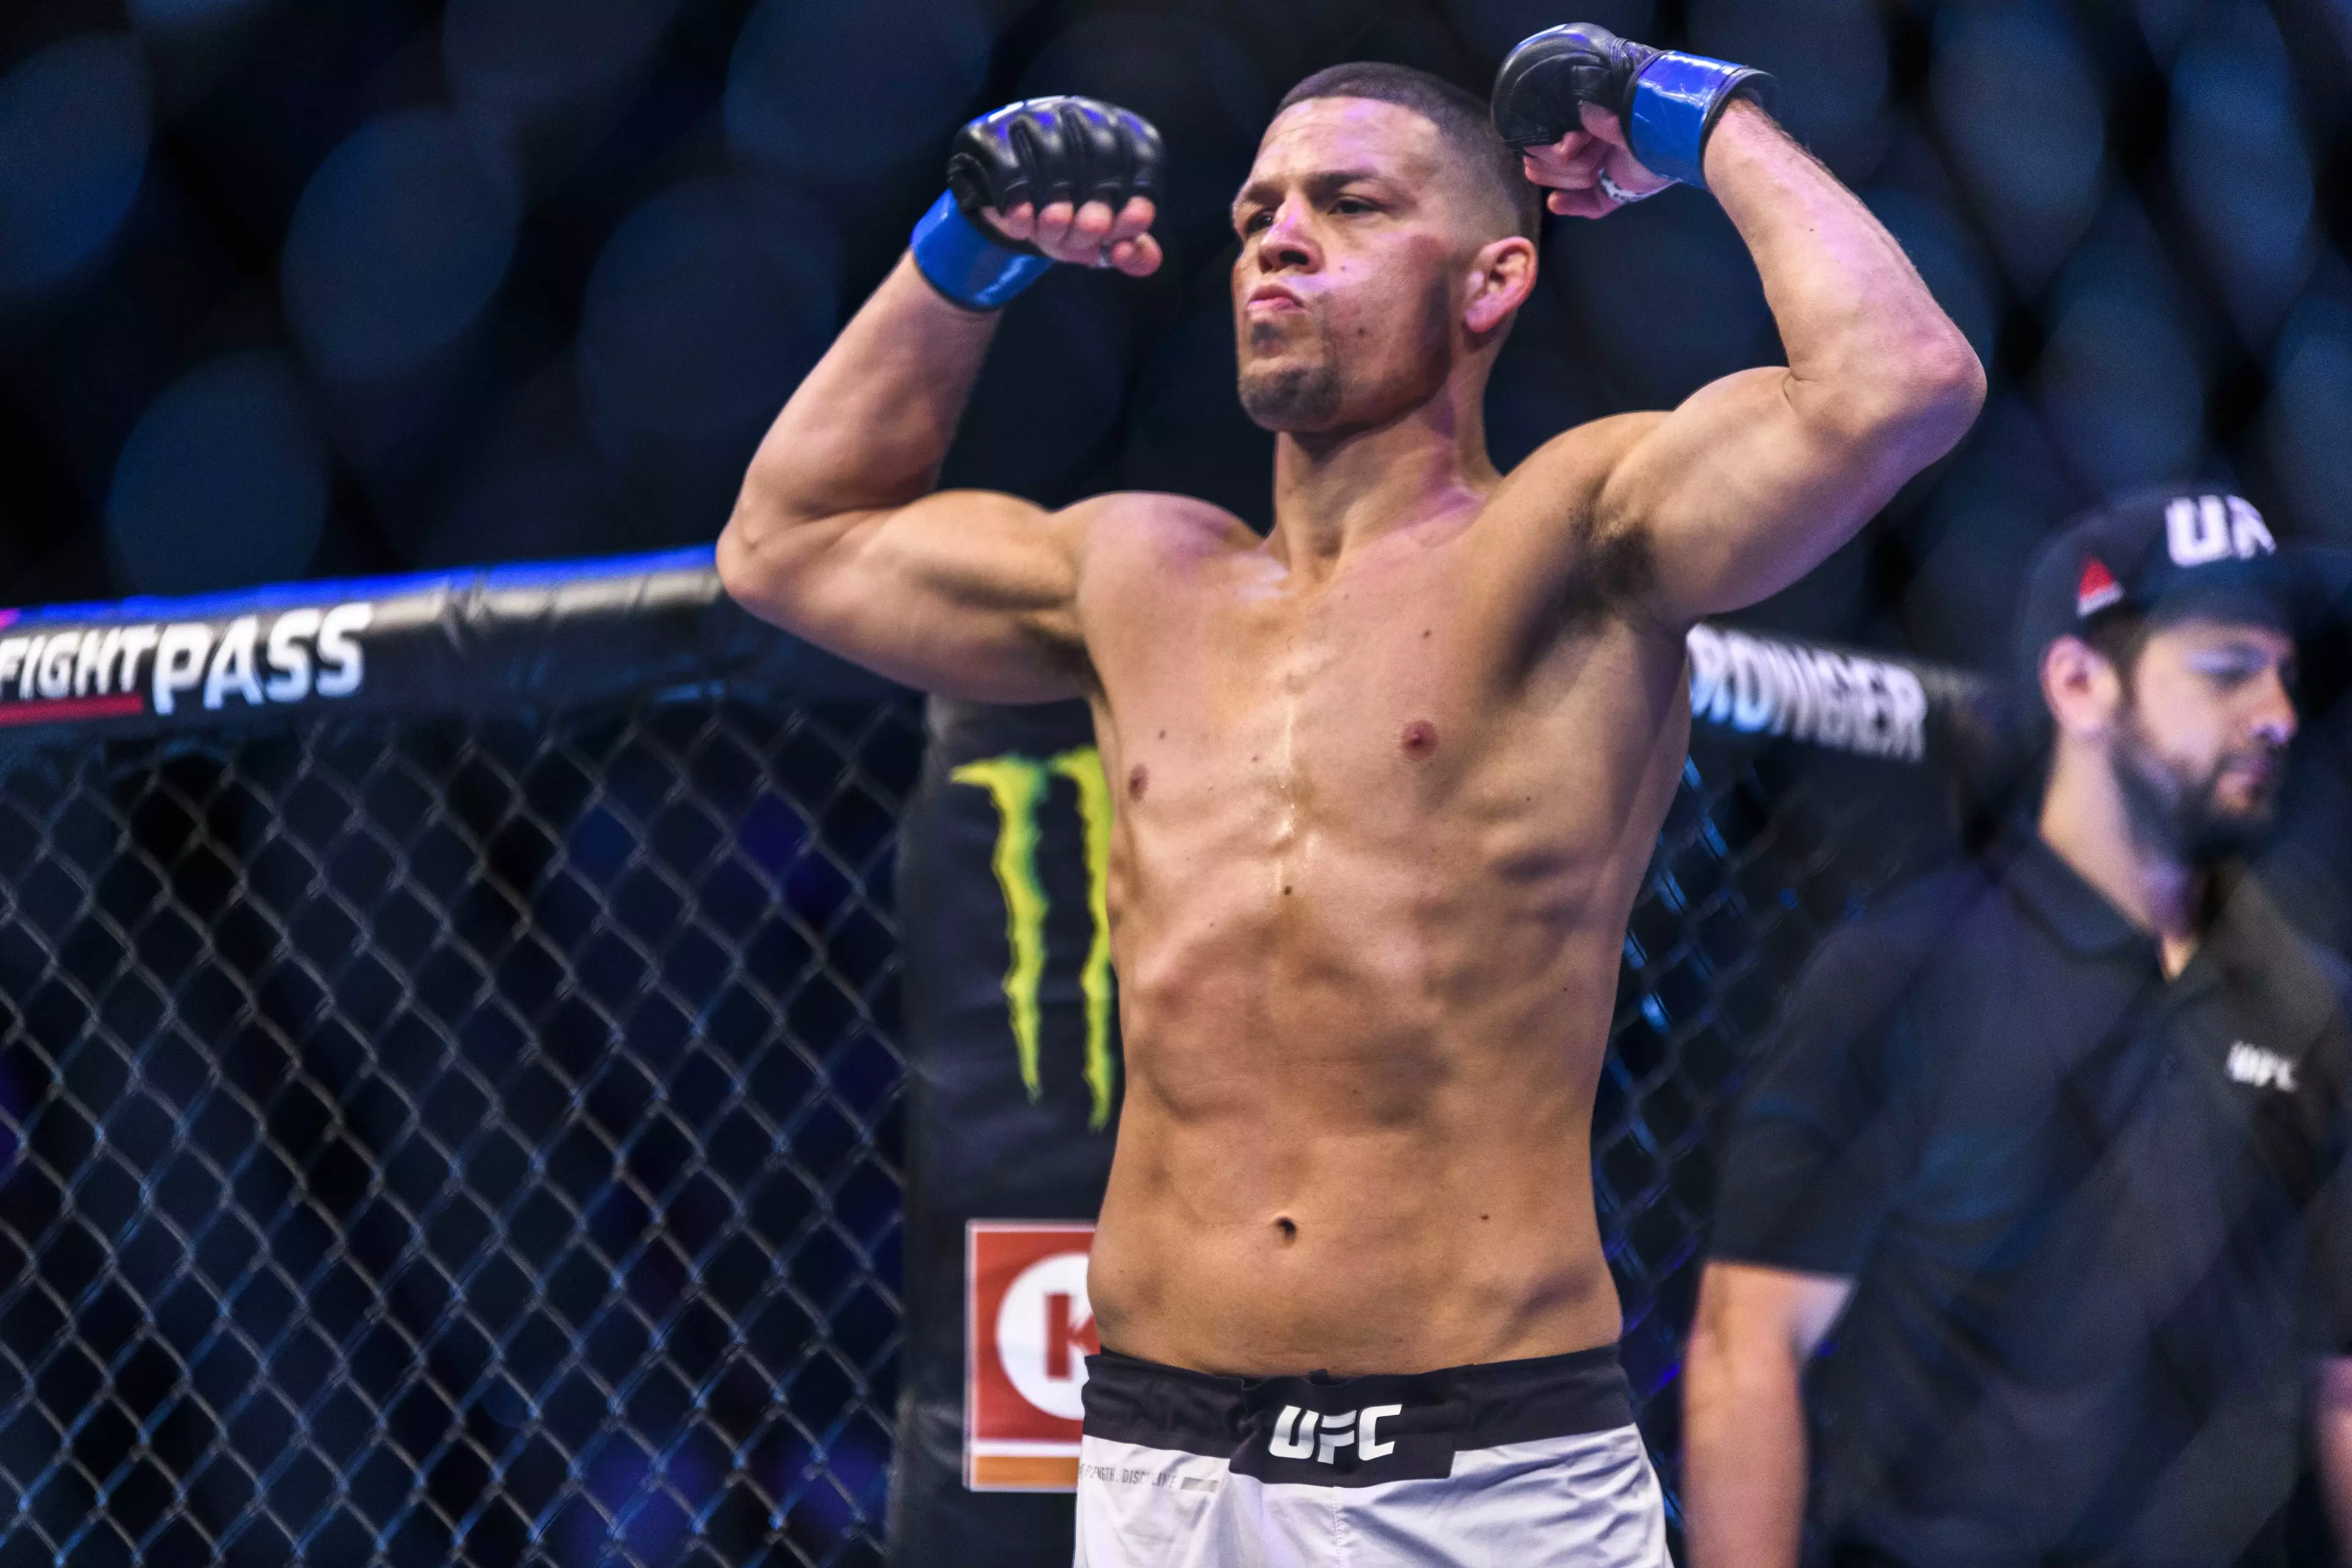 Nate Diaz made a winning return to the Octagon after three years out